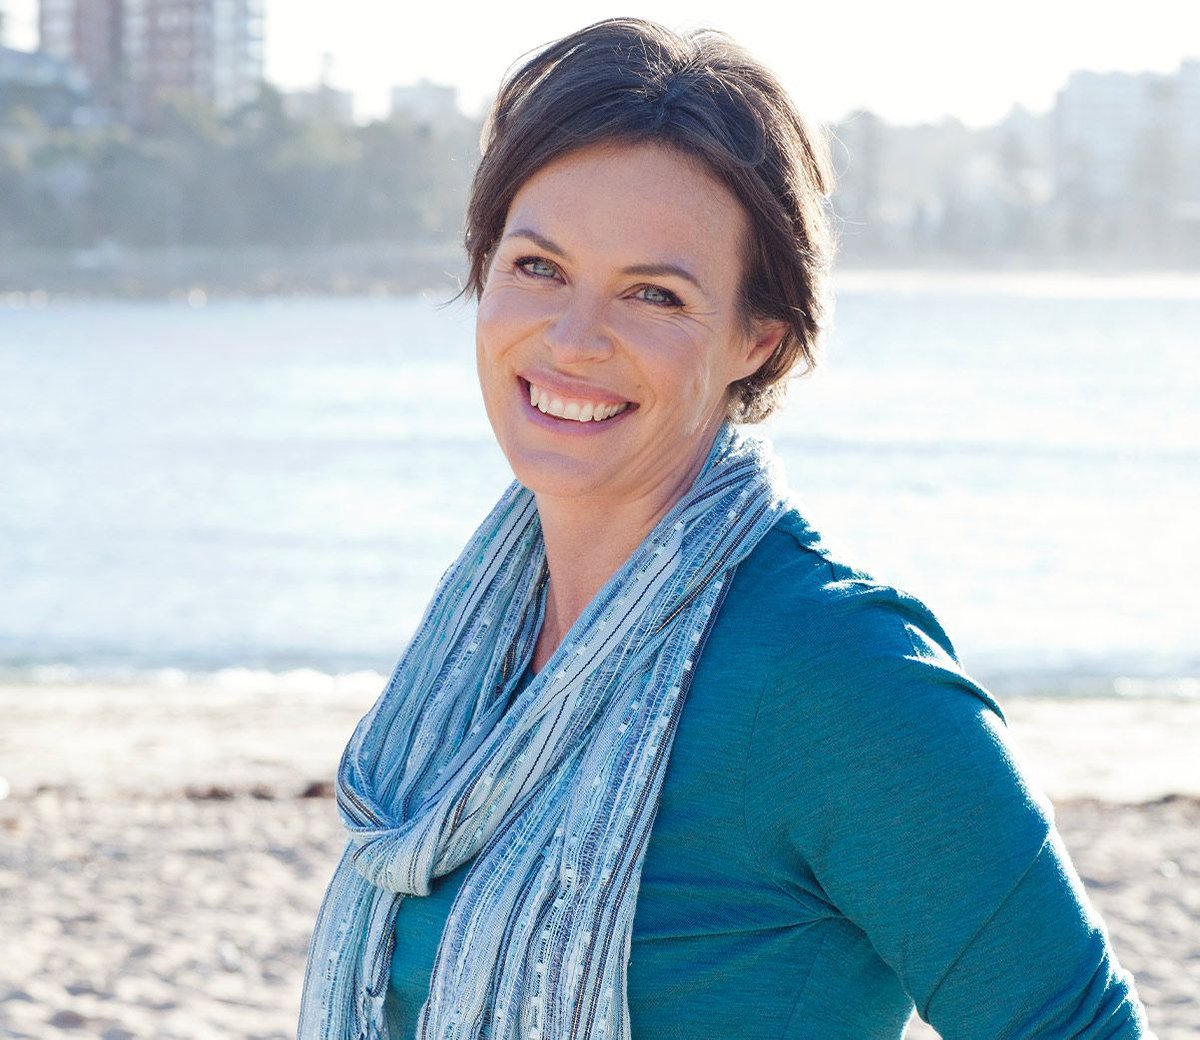 Another featured author, Dr @SarahMMckay, a neuroscientist from #NorthernBeaches, will discuss the influence of #parenting on our brains & related topics. Stay updated with our news by signing up on our website. Don't miss out on #MWF24 14-16 March 2024! buff.ly/3Nsj7kT